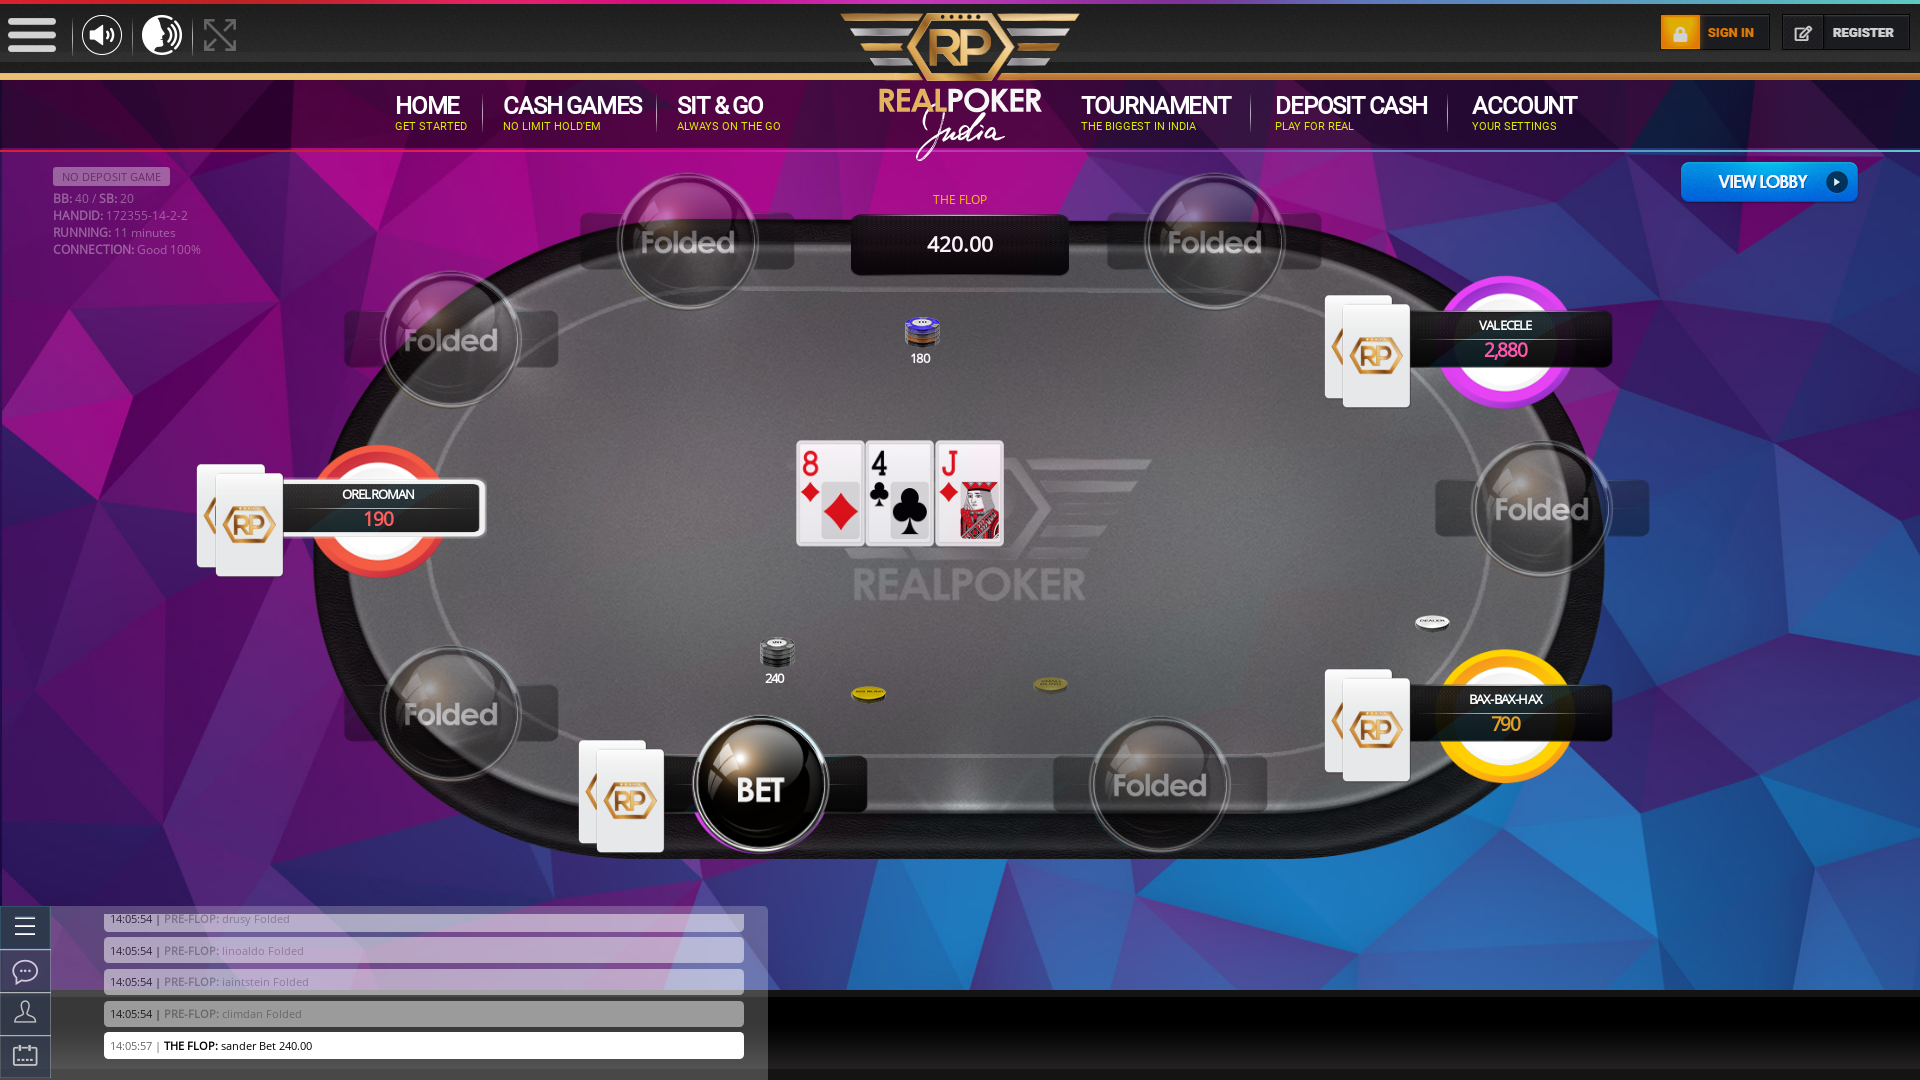 Banashankari, Bangalore online poker game on a 10 player table in the 11th minute of the meeting